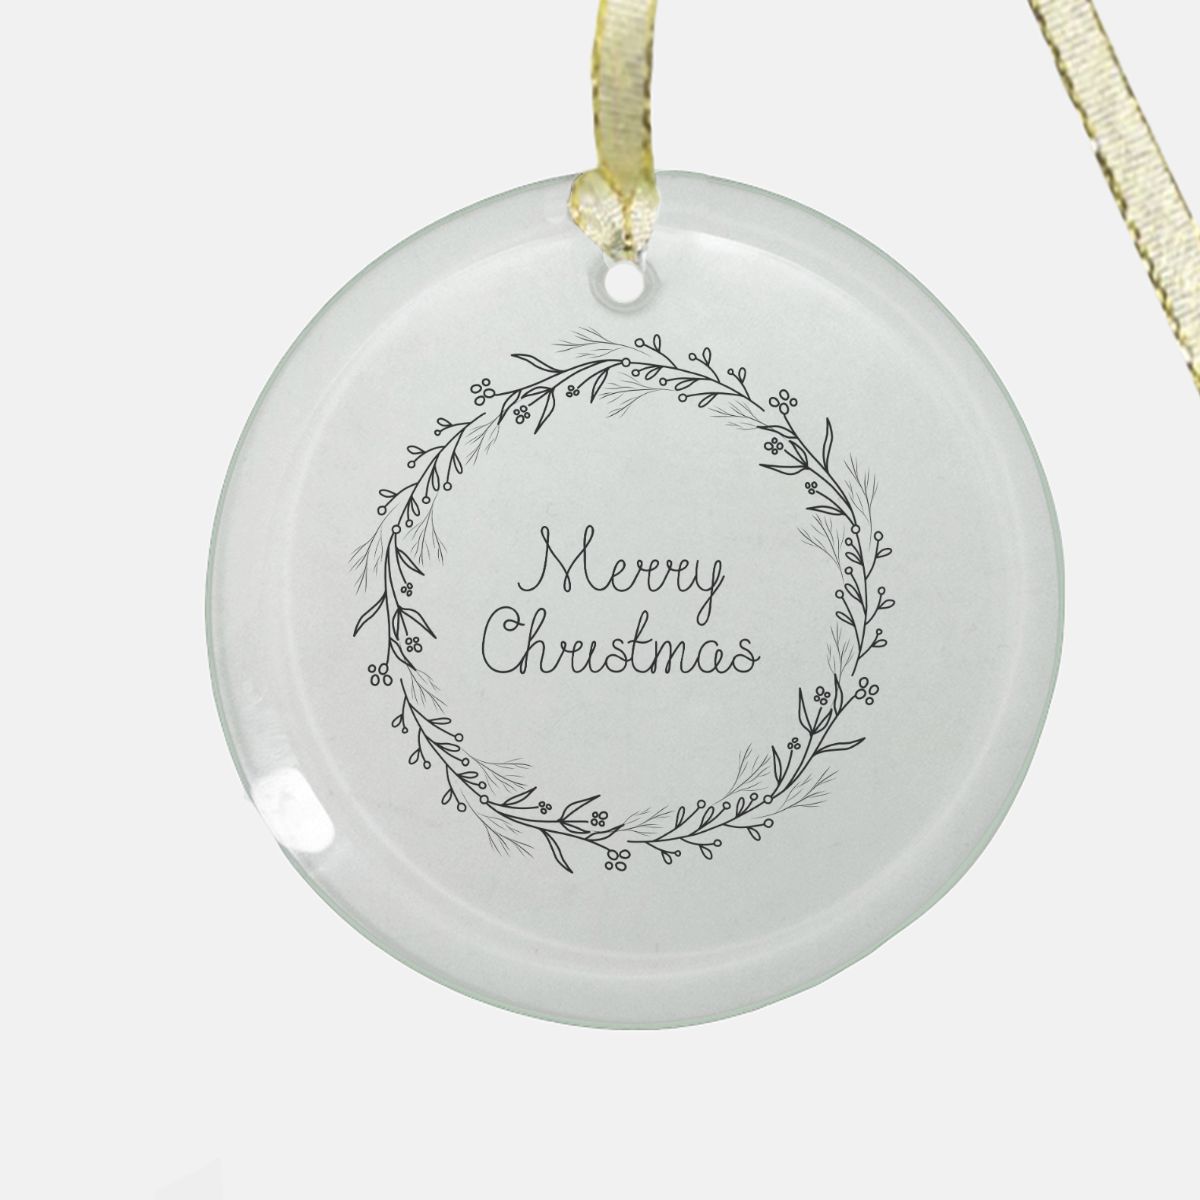 Round Clear Glass Holiday Ornament - Merry Christmas Wreath